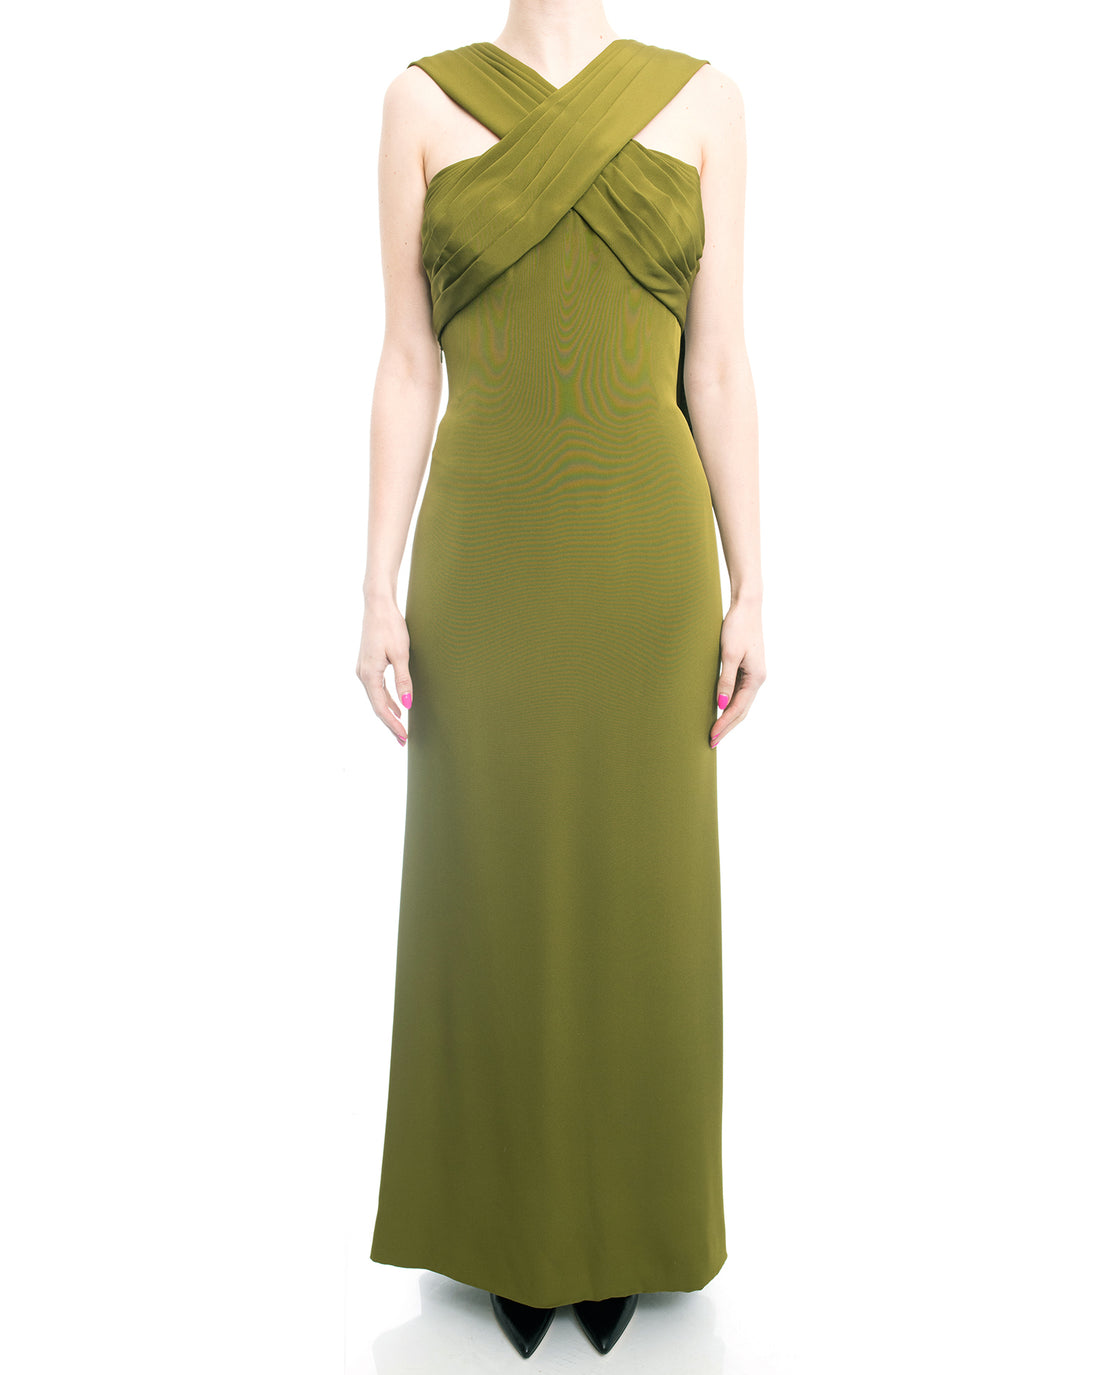 Yves Saint Laurent Haute Couture Vintage 1990’s Olive Green Gown